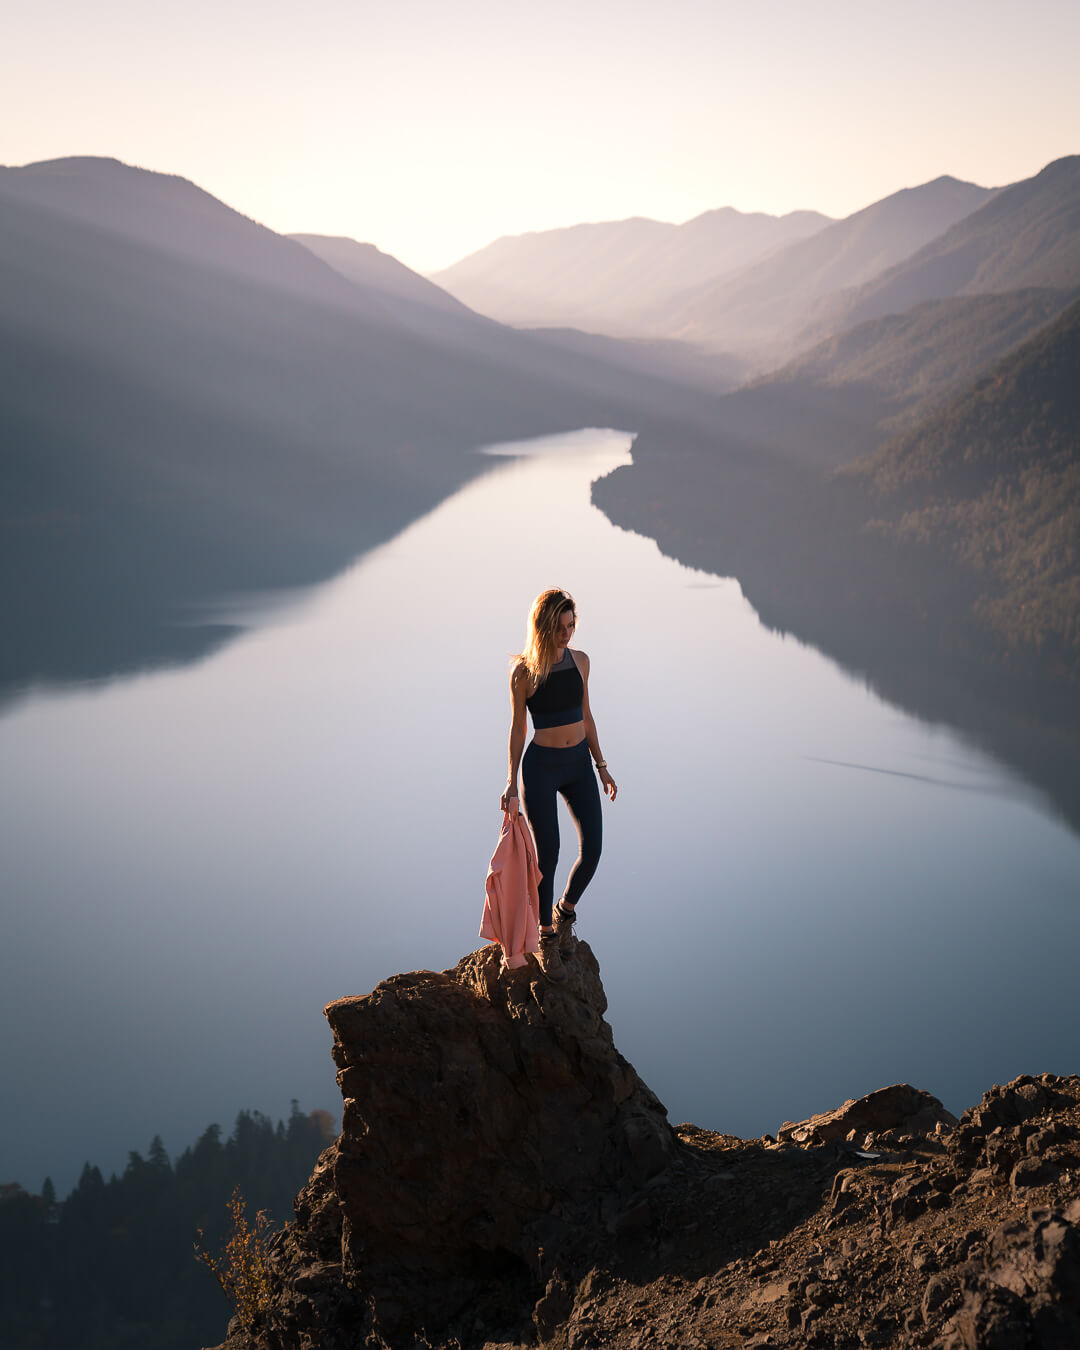 Views of Lake Crescent from the top of Mount Storm King on the Olympic Peninsula.